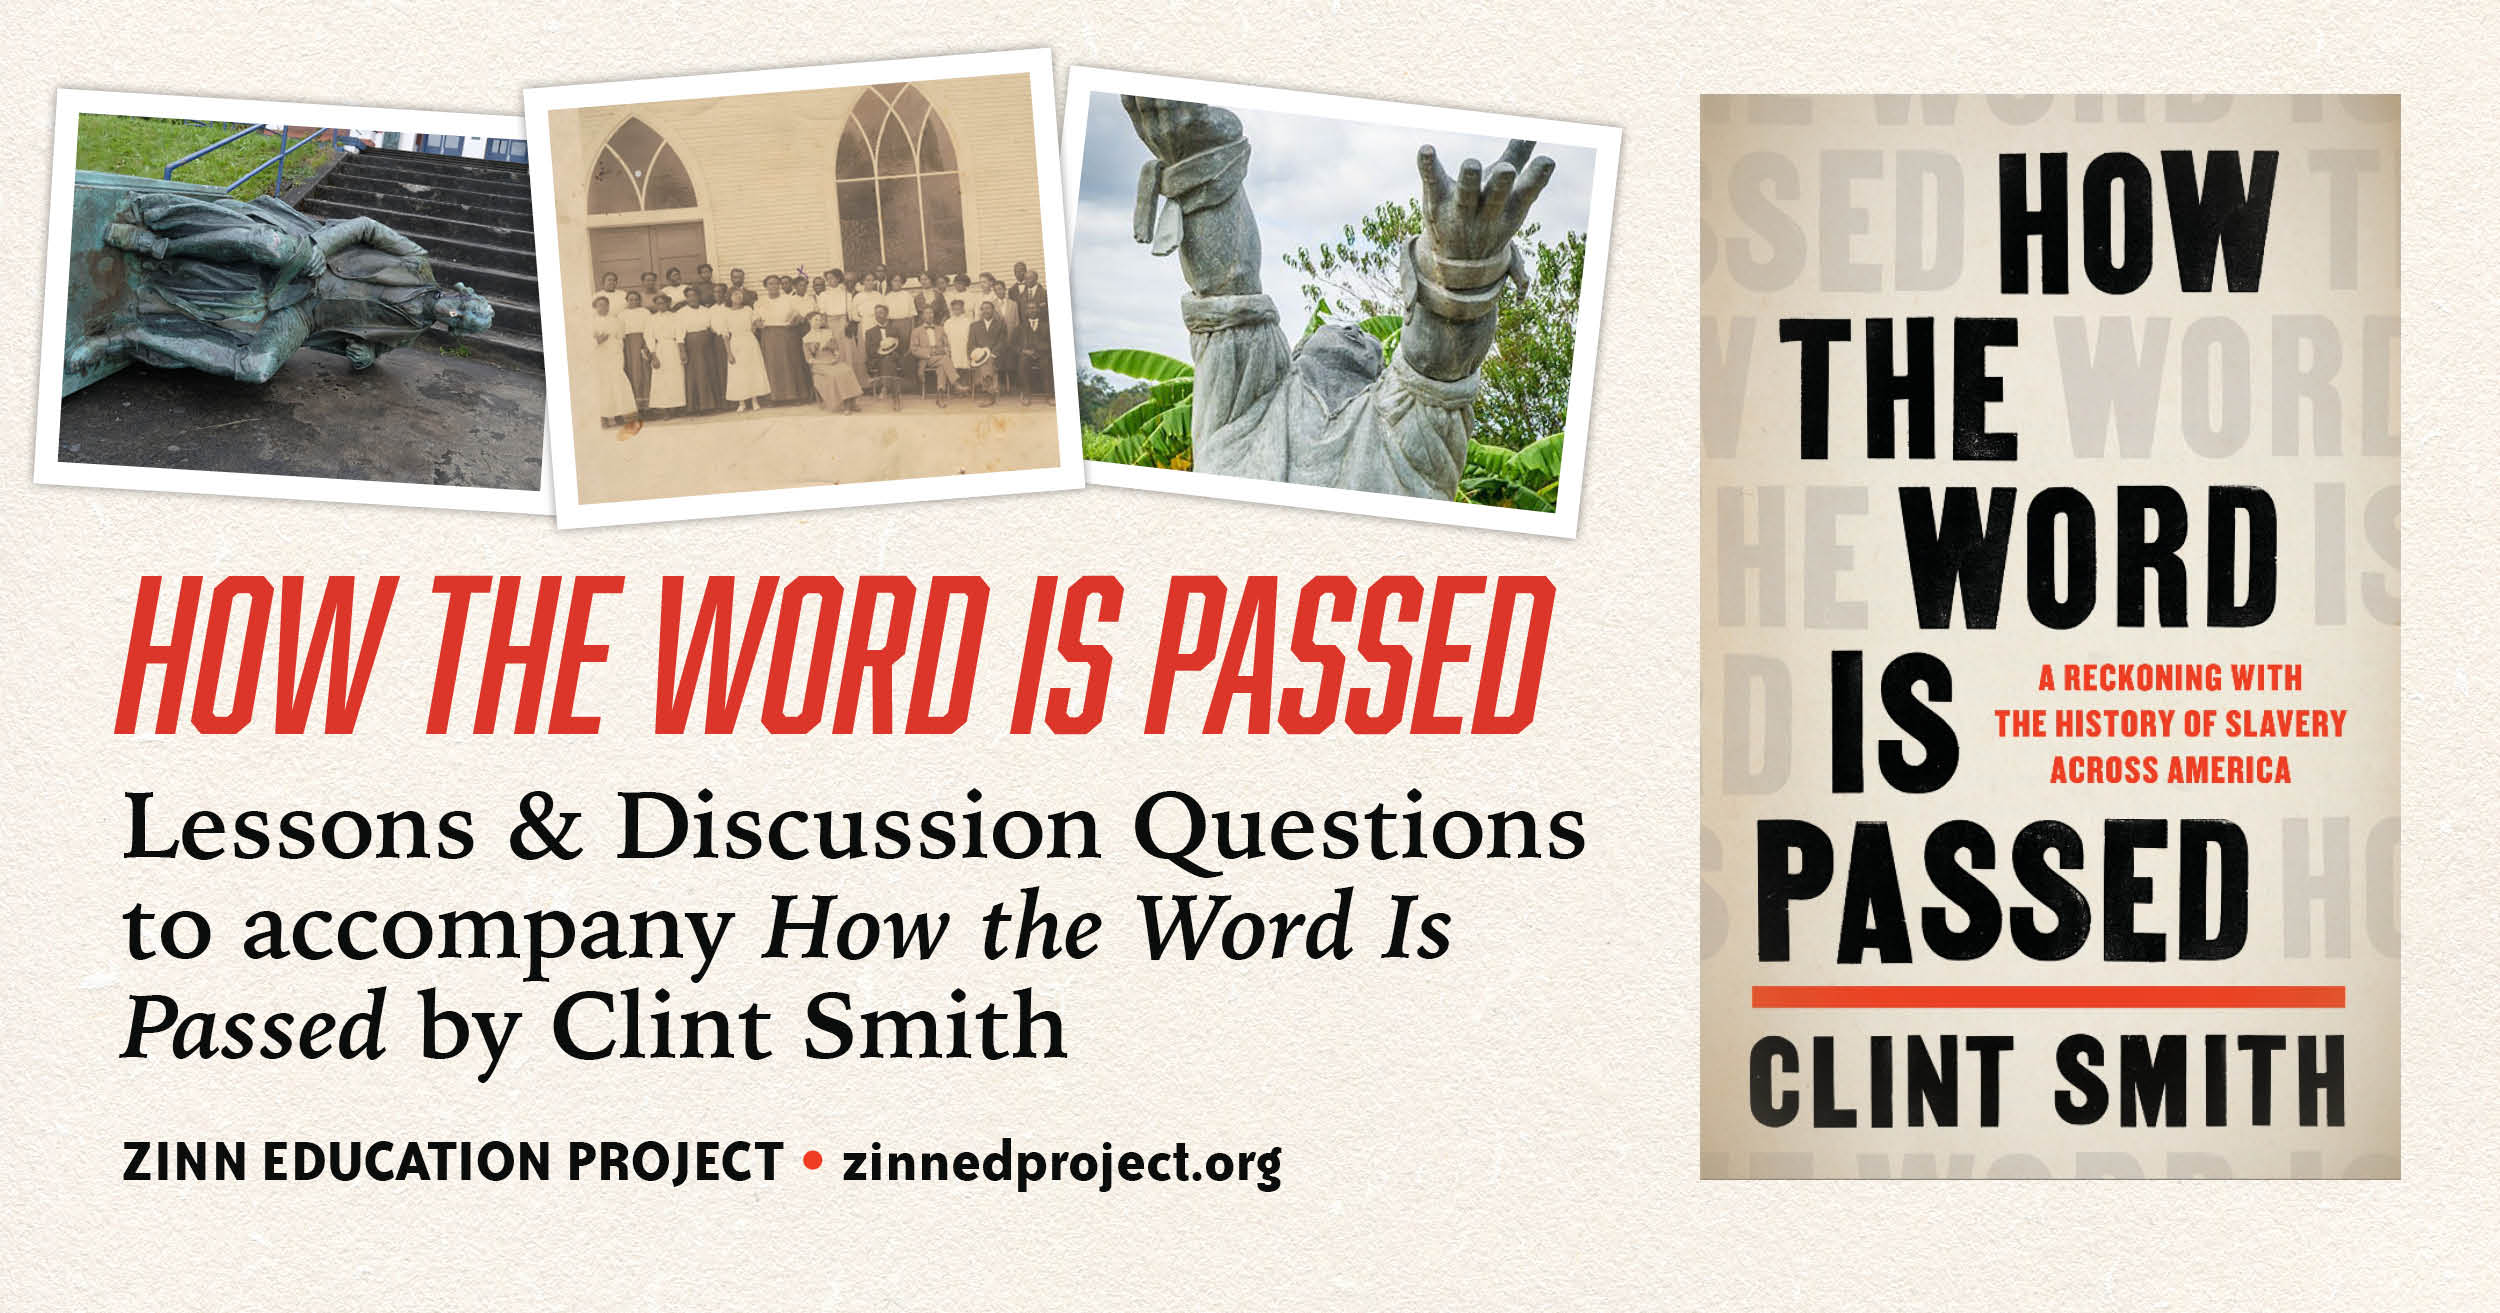 clint smith how the word is passed review